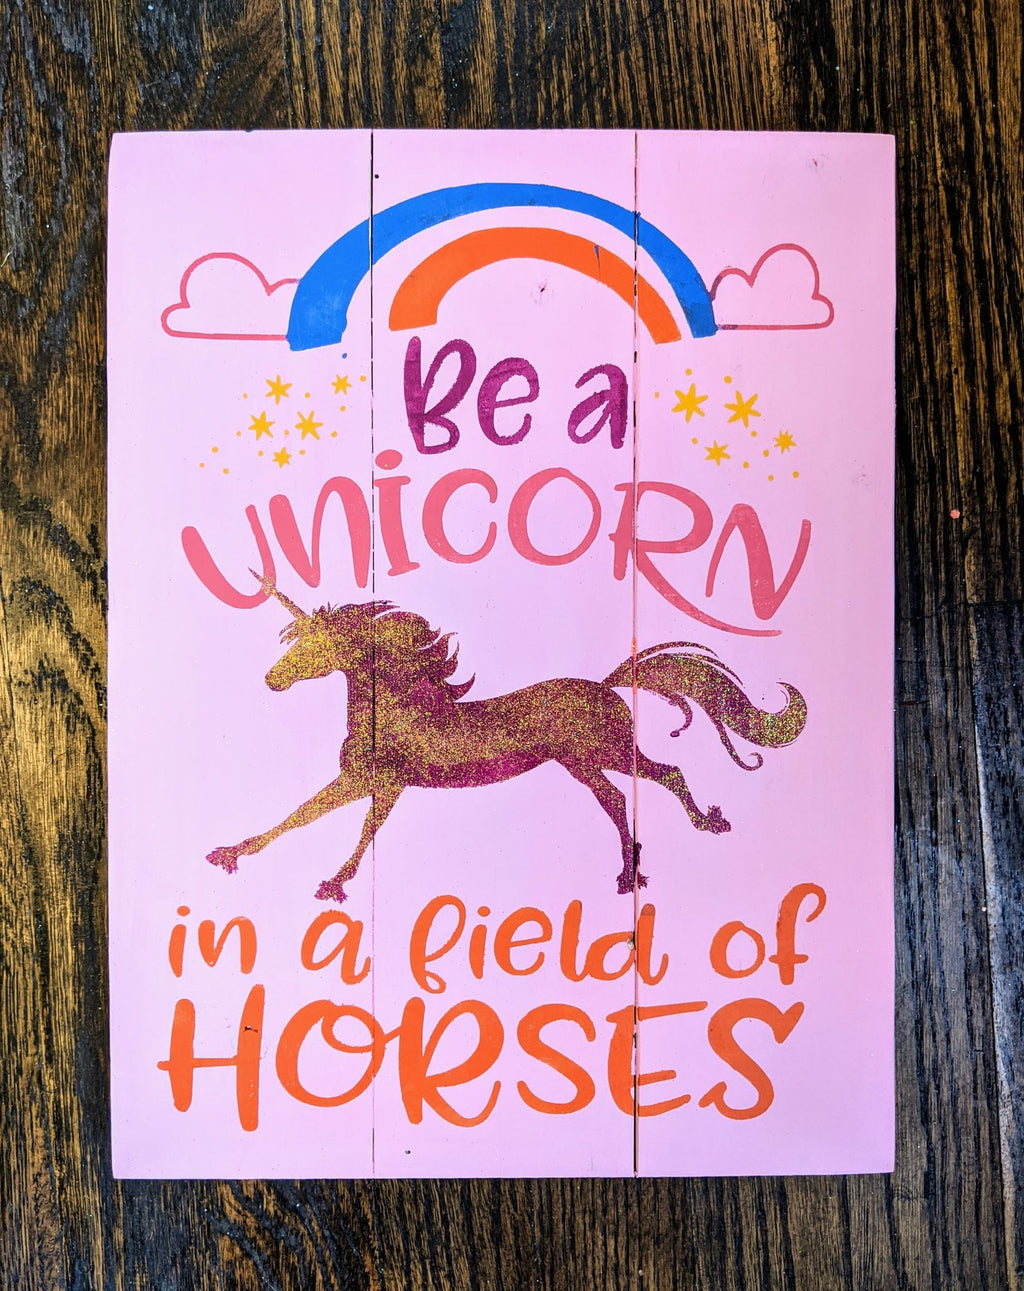 Be a unicorn in a field of horses